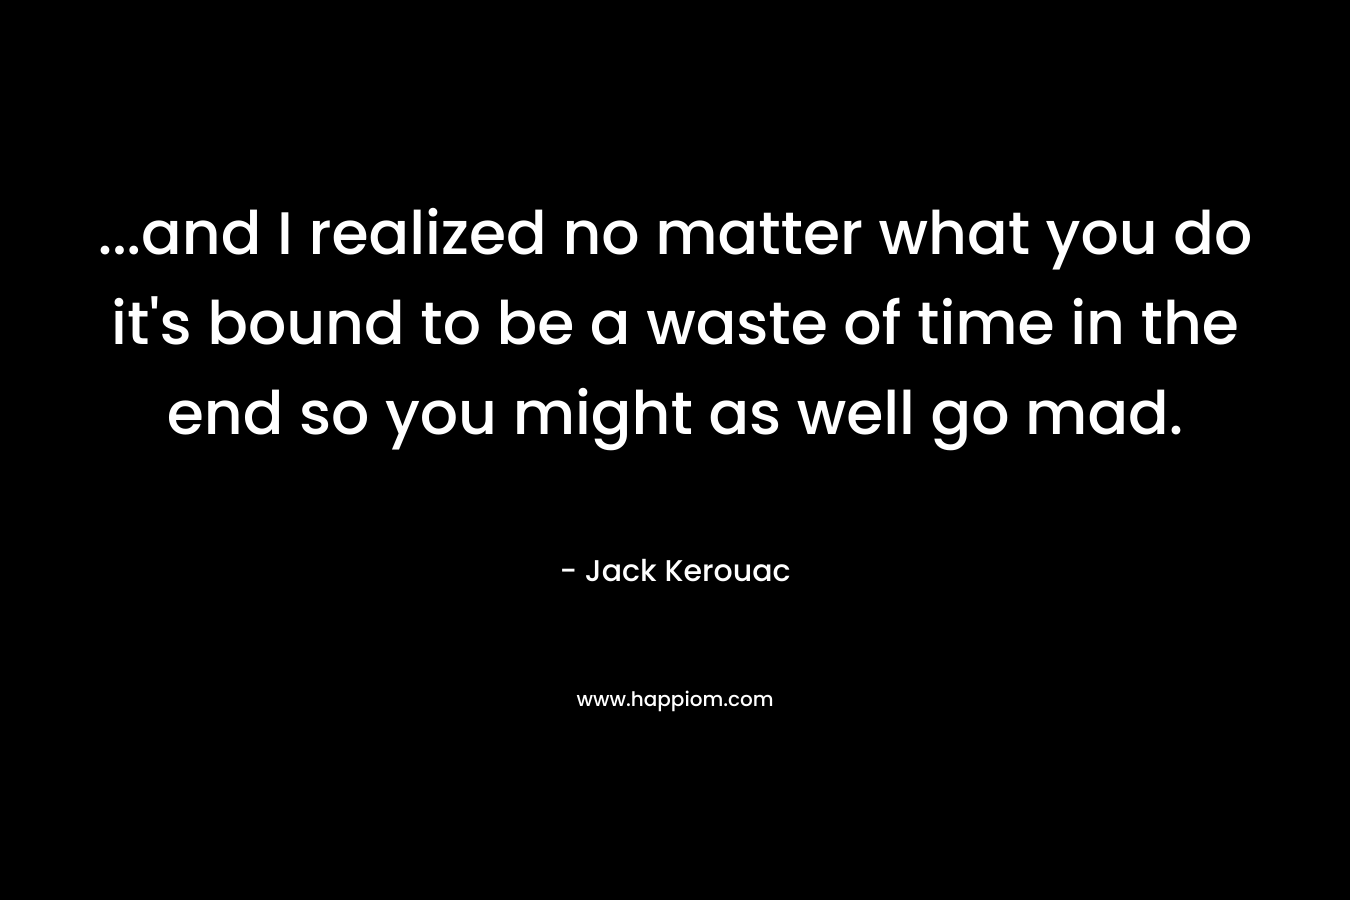 …and I realized no matter what you do it’s bound to be a waste of time in the end so you might as well go mad. – Jack Kerouac